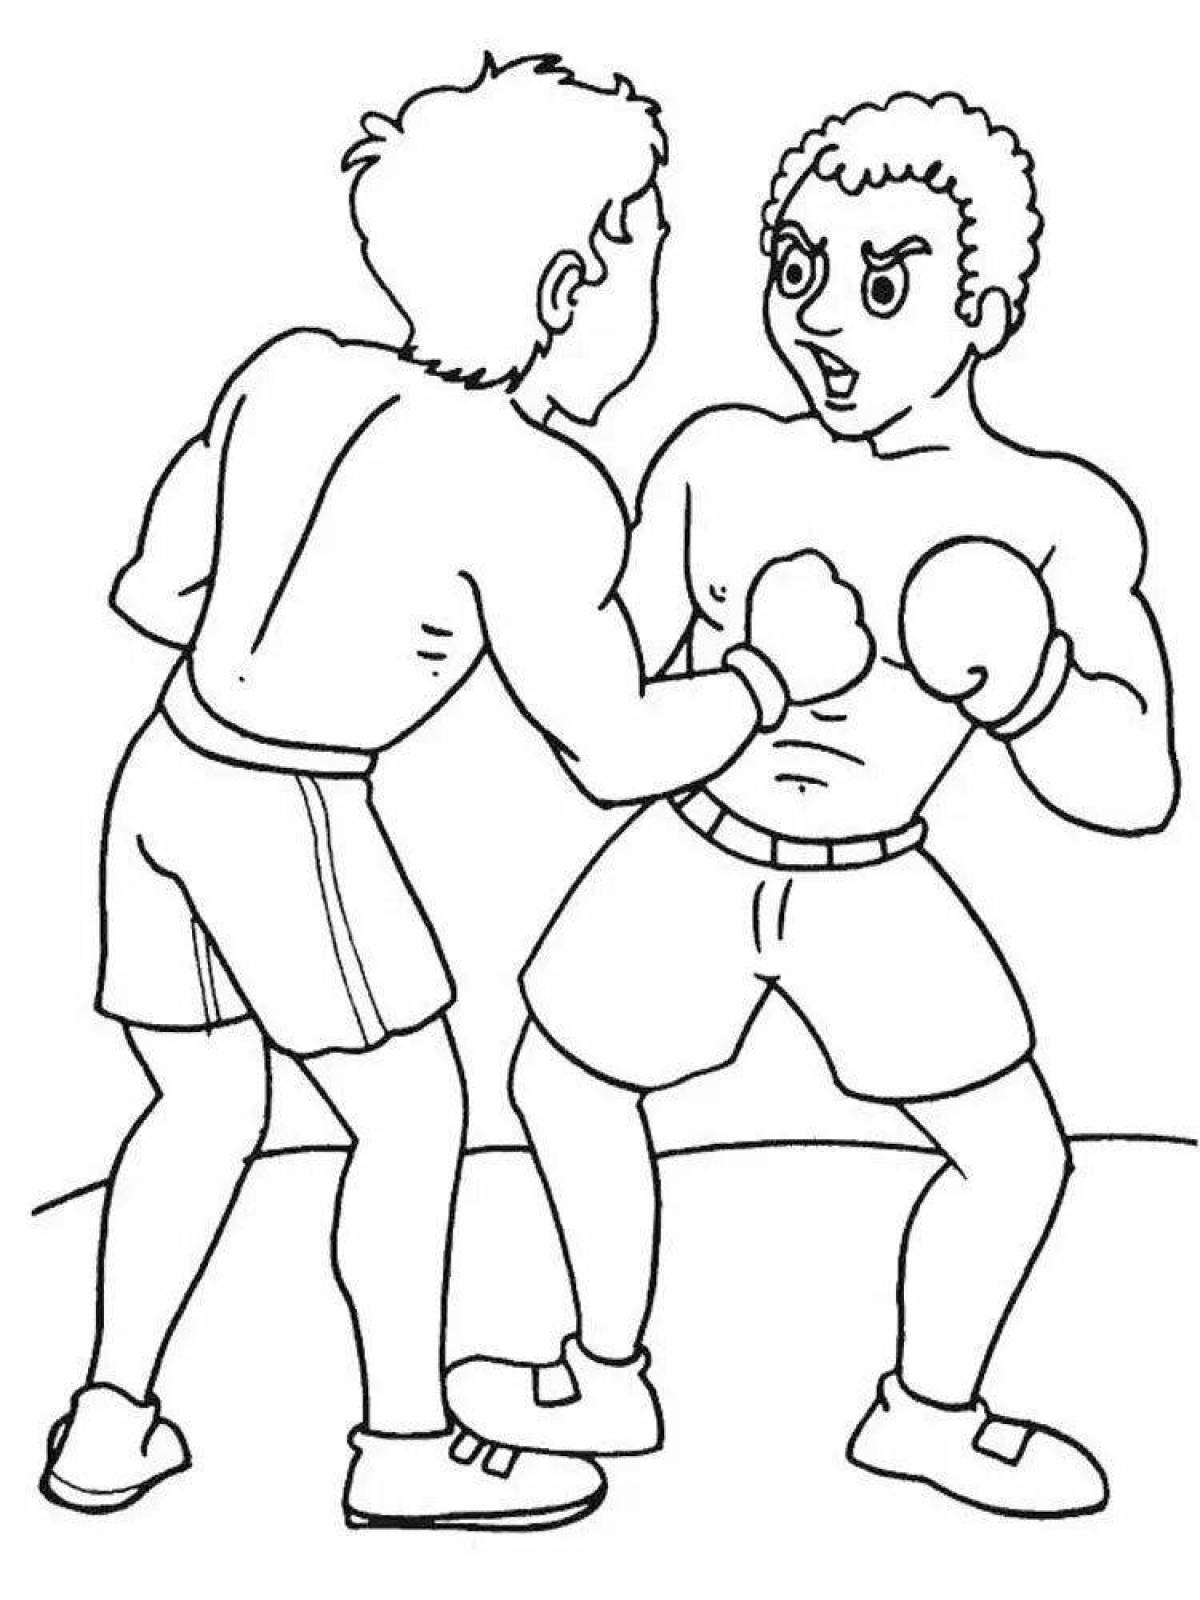 Powerful boxer coloring page